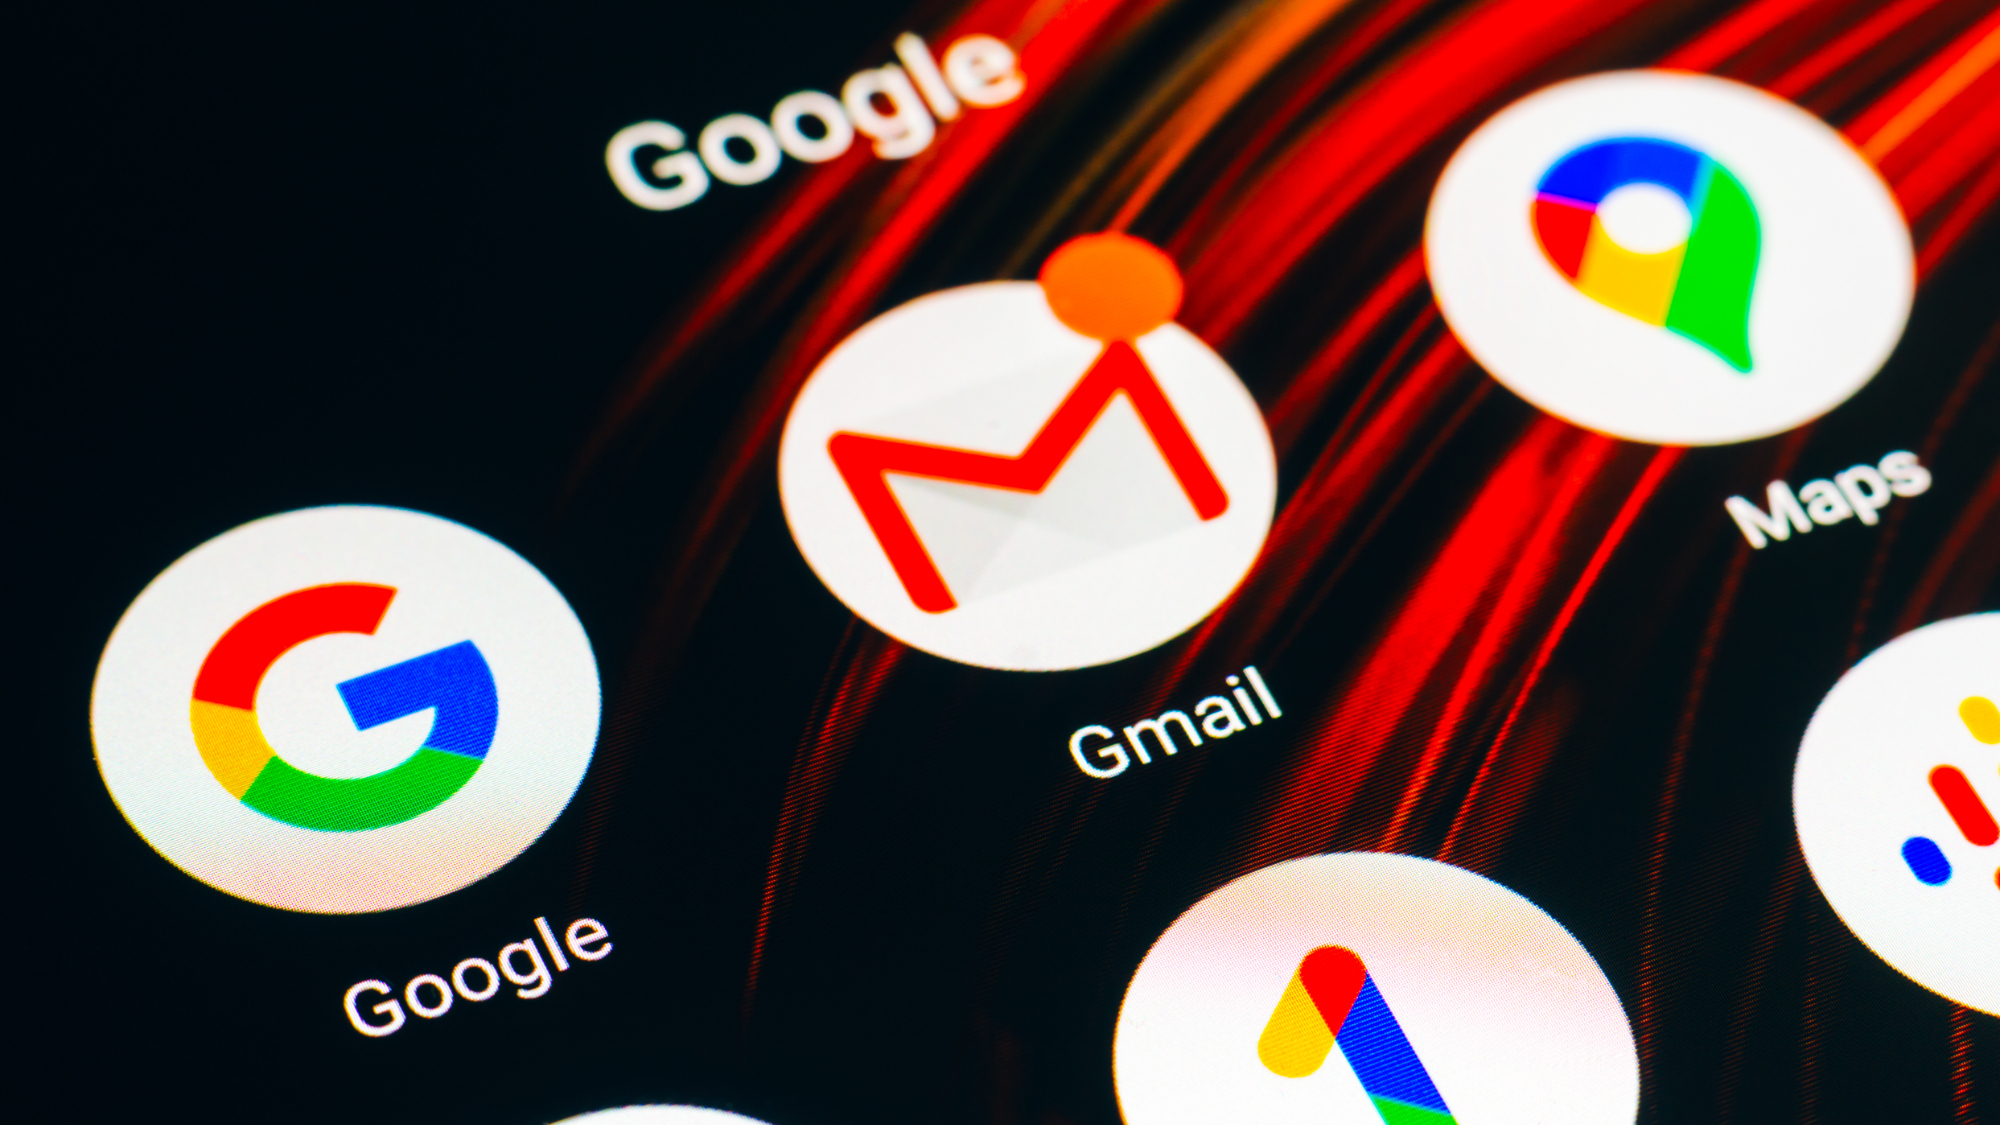  Google will start deleting inactive accounts if they haven't been used in two years 